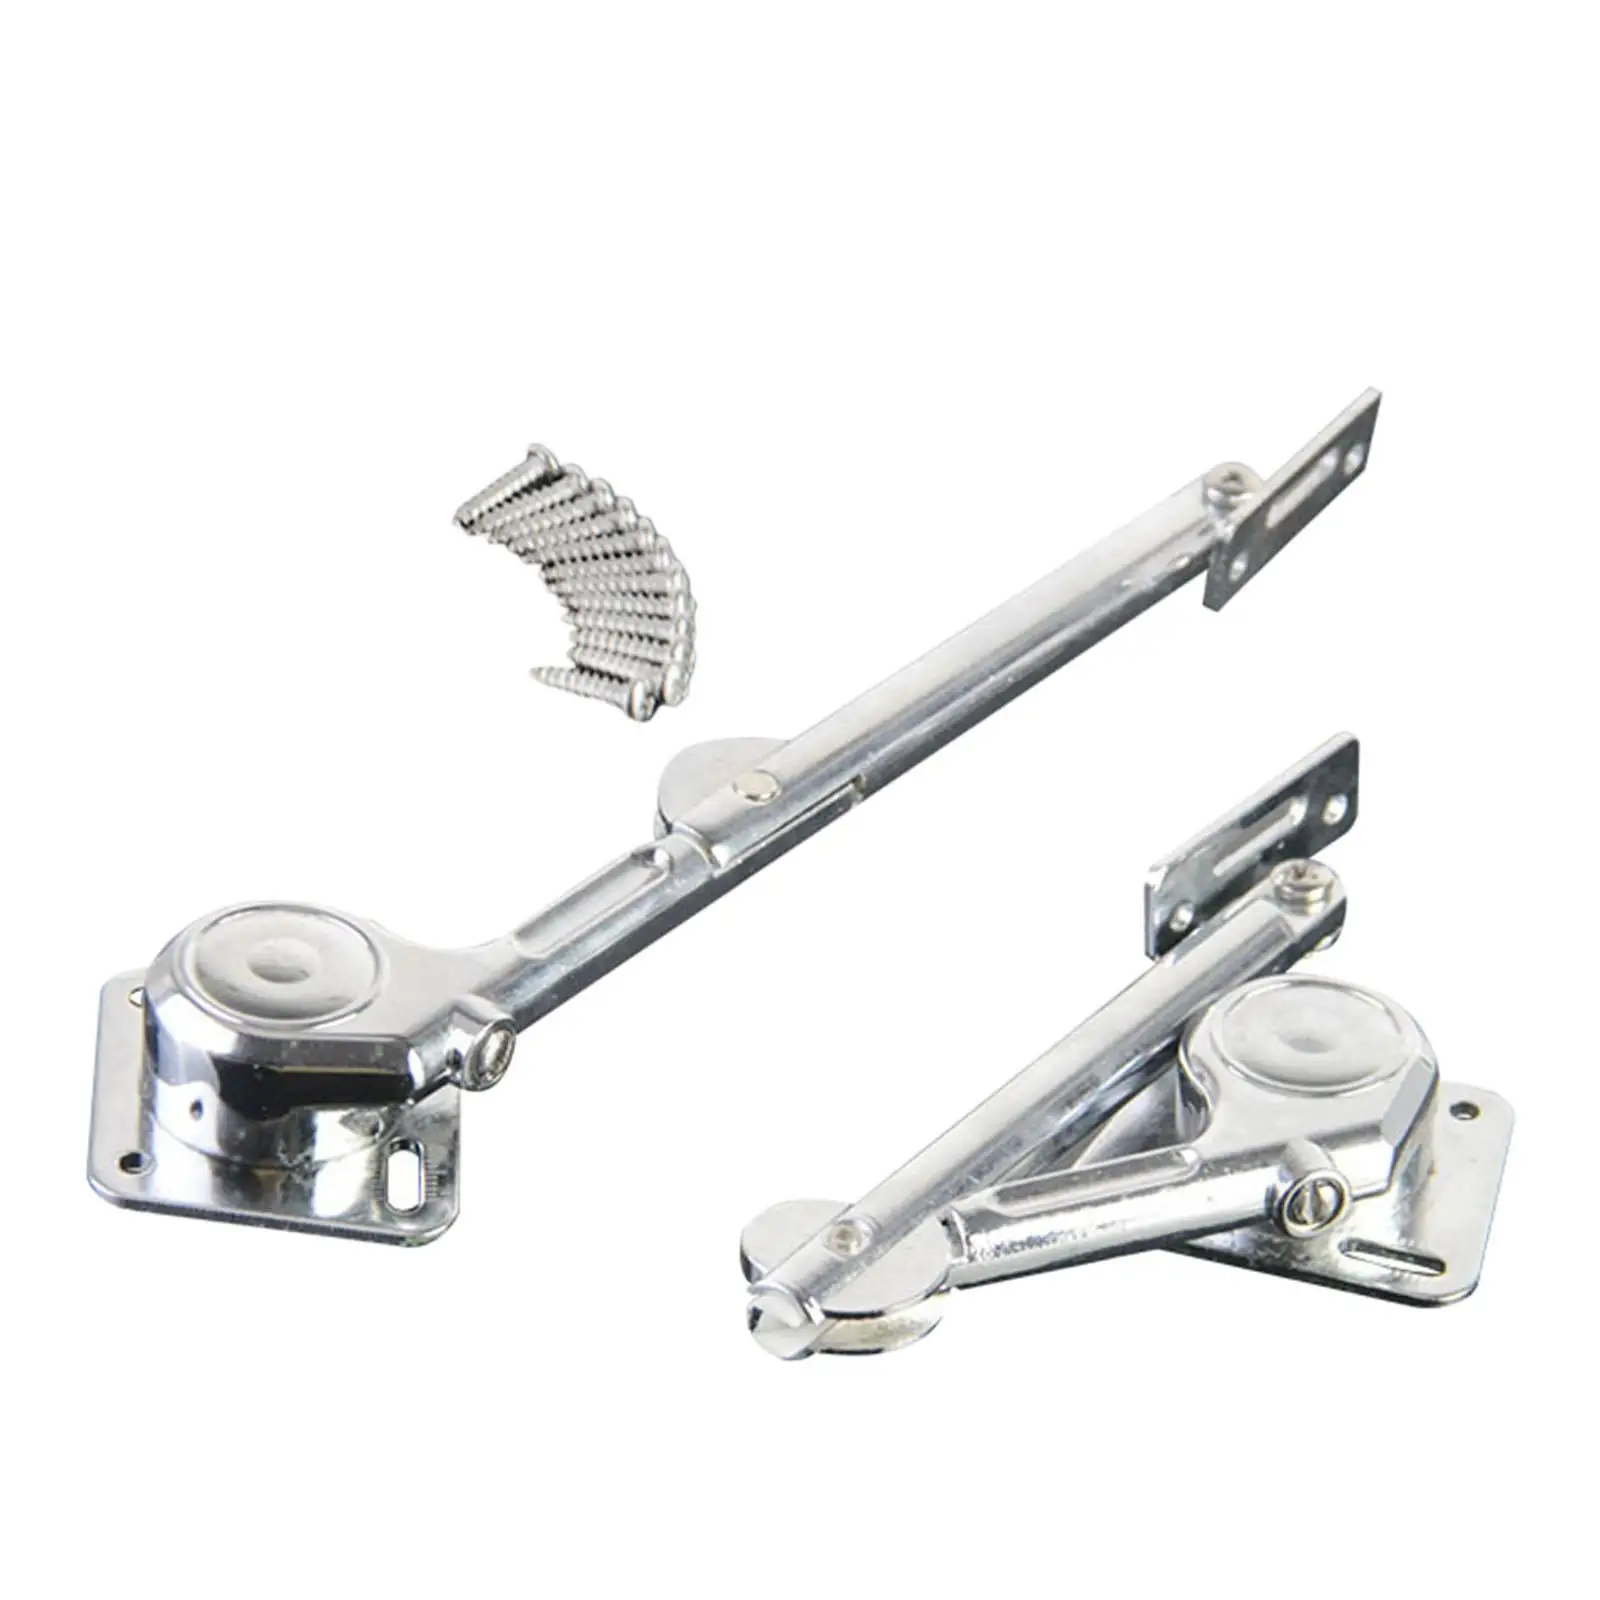 2Pcs Heavy Duty Hydraulic Hinges Support Adjustable Accessories Furniture Shock Hardware Lift up for Kitchen Cabinet